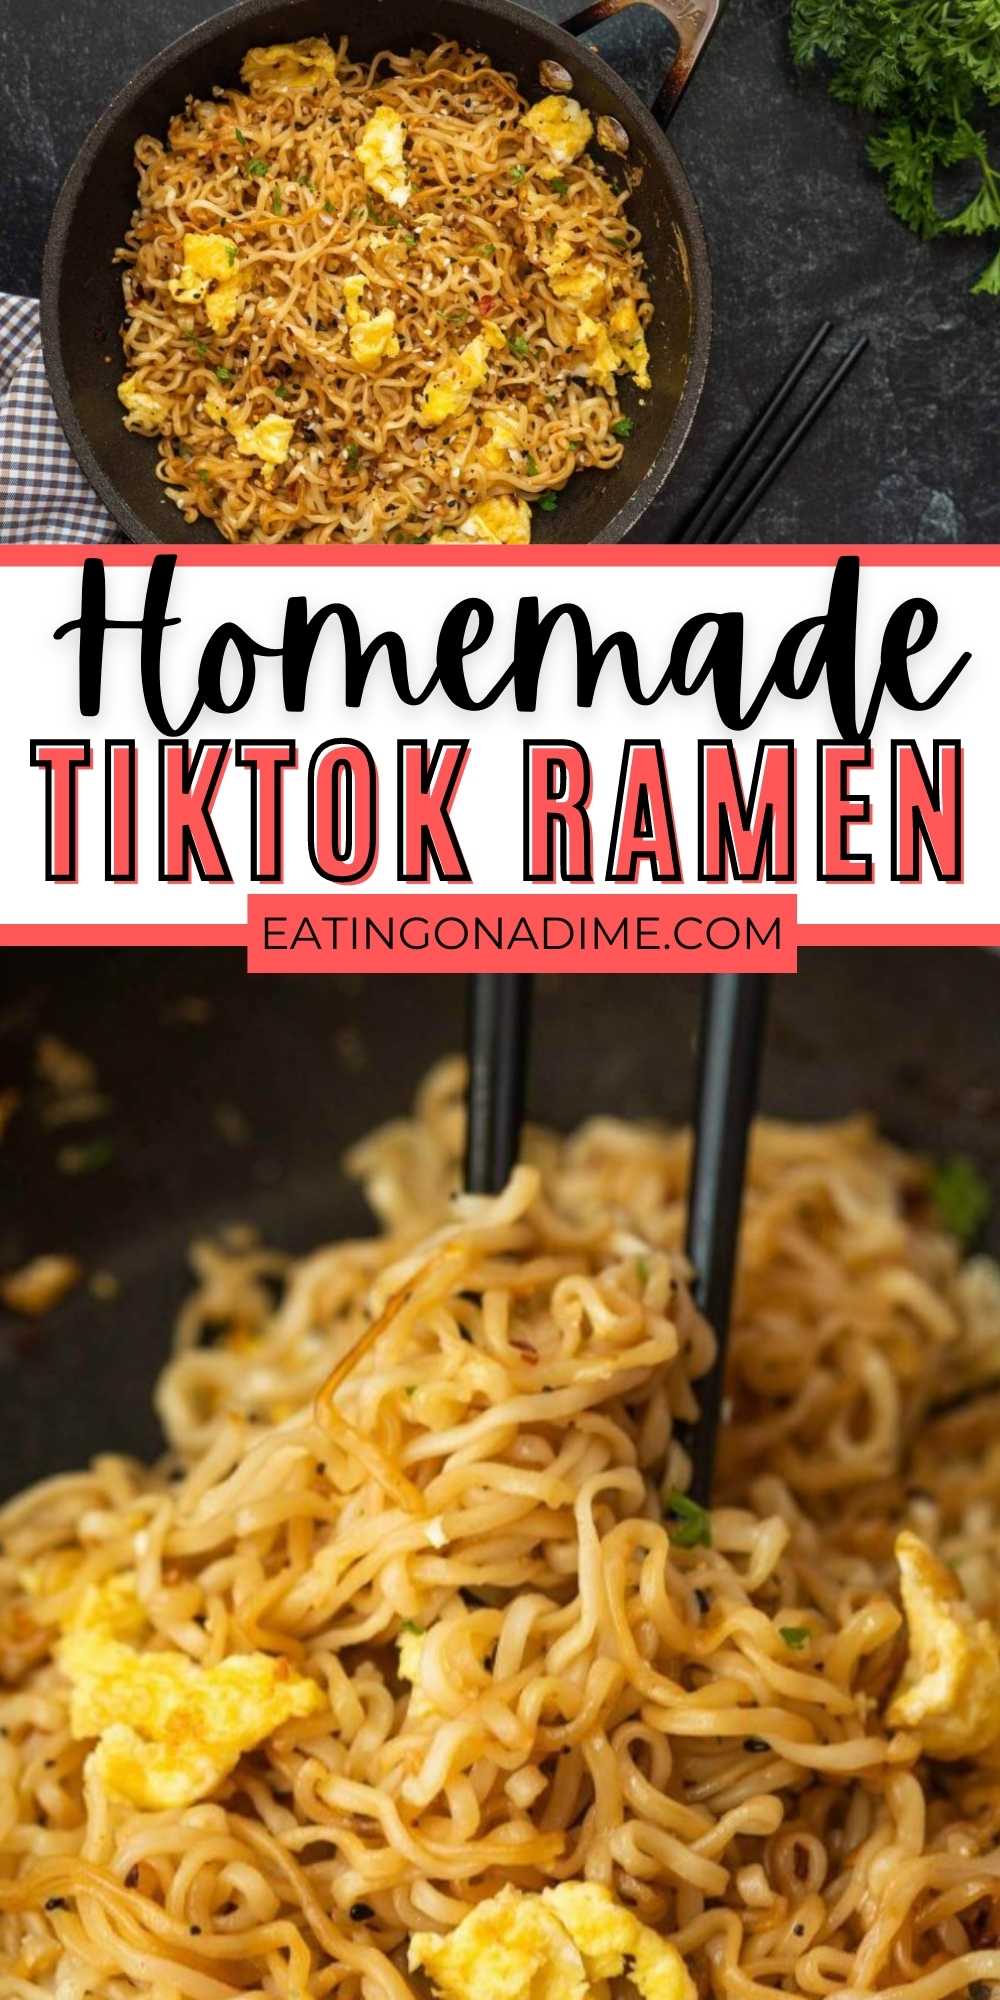 If you like watching food hacks on Tiktok then you have seen Tiktok Ramen. This dish is easy to make and full of sweet and salty flavors. A fun food hack that my kids love to make. #eatingonadime #foodhack #tiktokramen